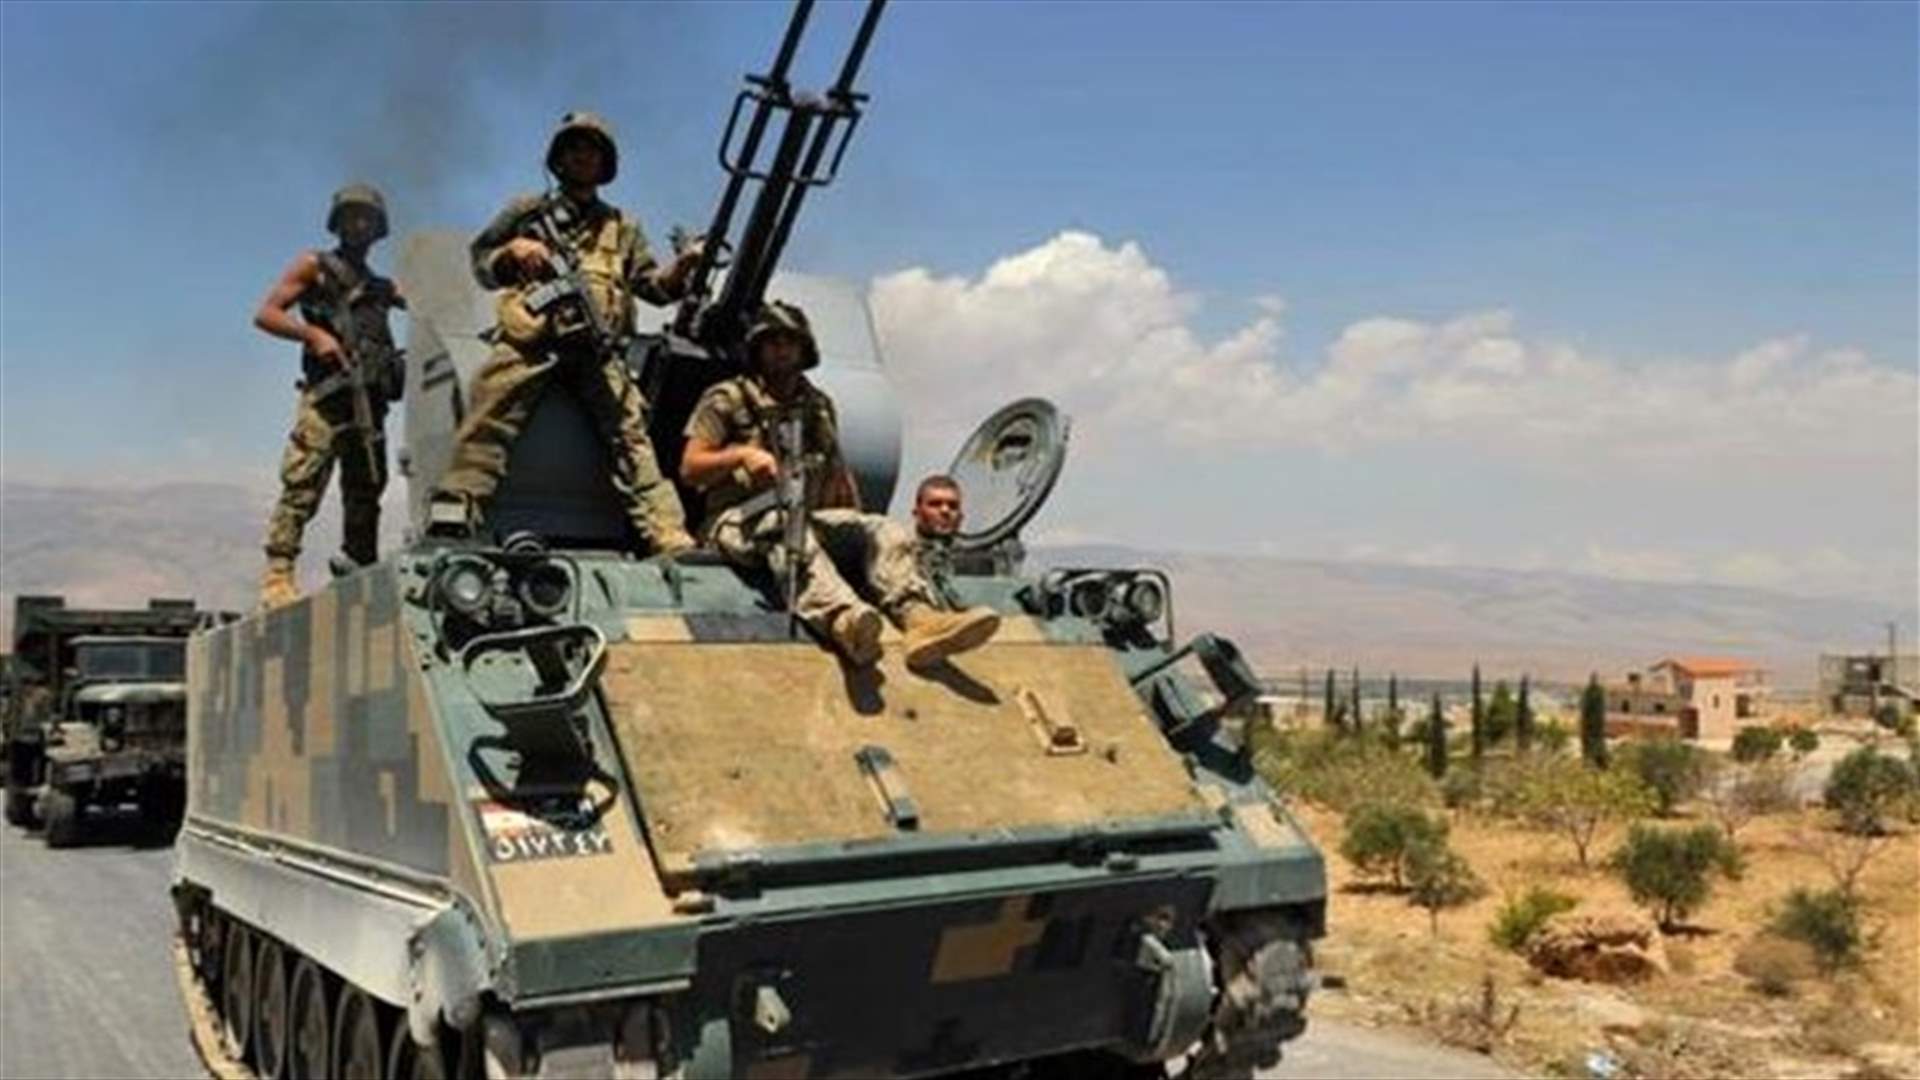 REPORT: New US aid delivery to Lebanon army to counter militant threat